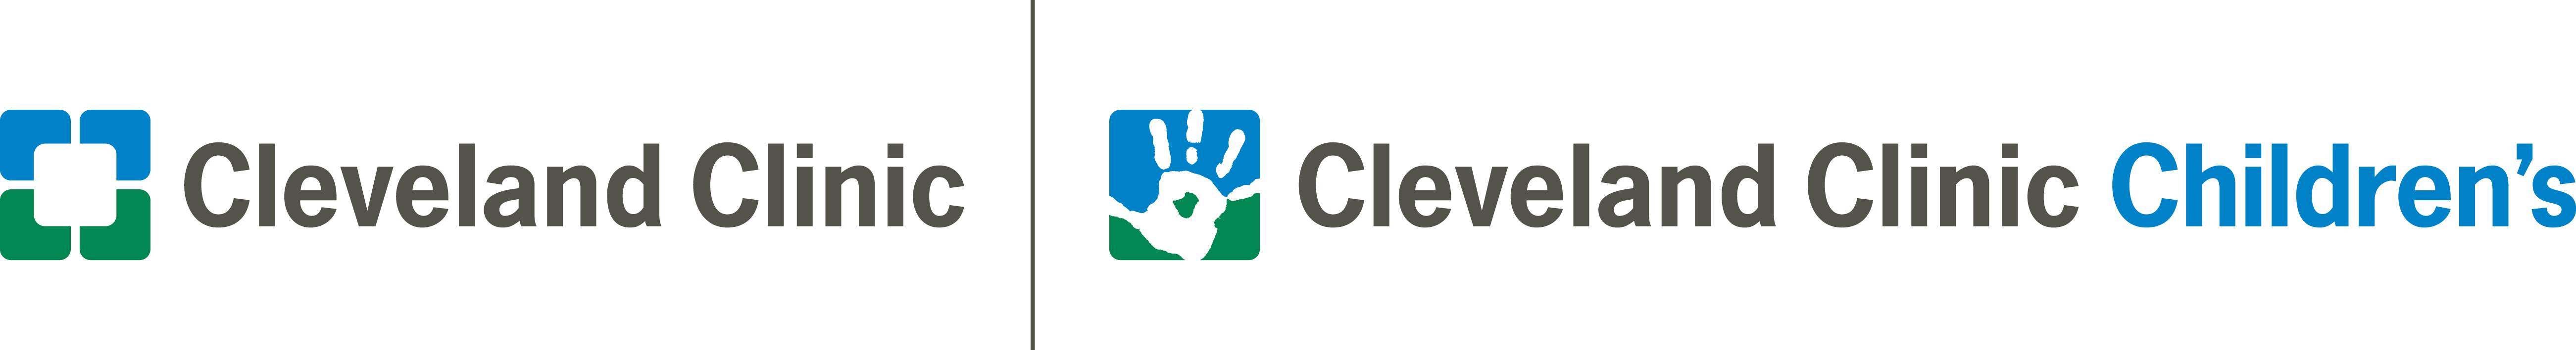 Cleveland Clinic and Cleveland Clinic Children’s Logos